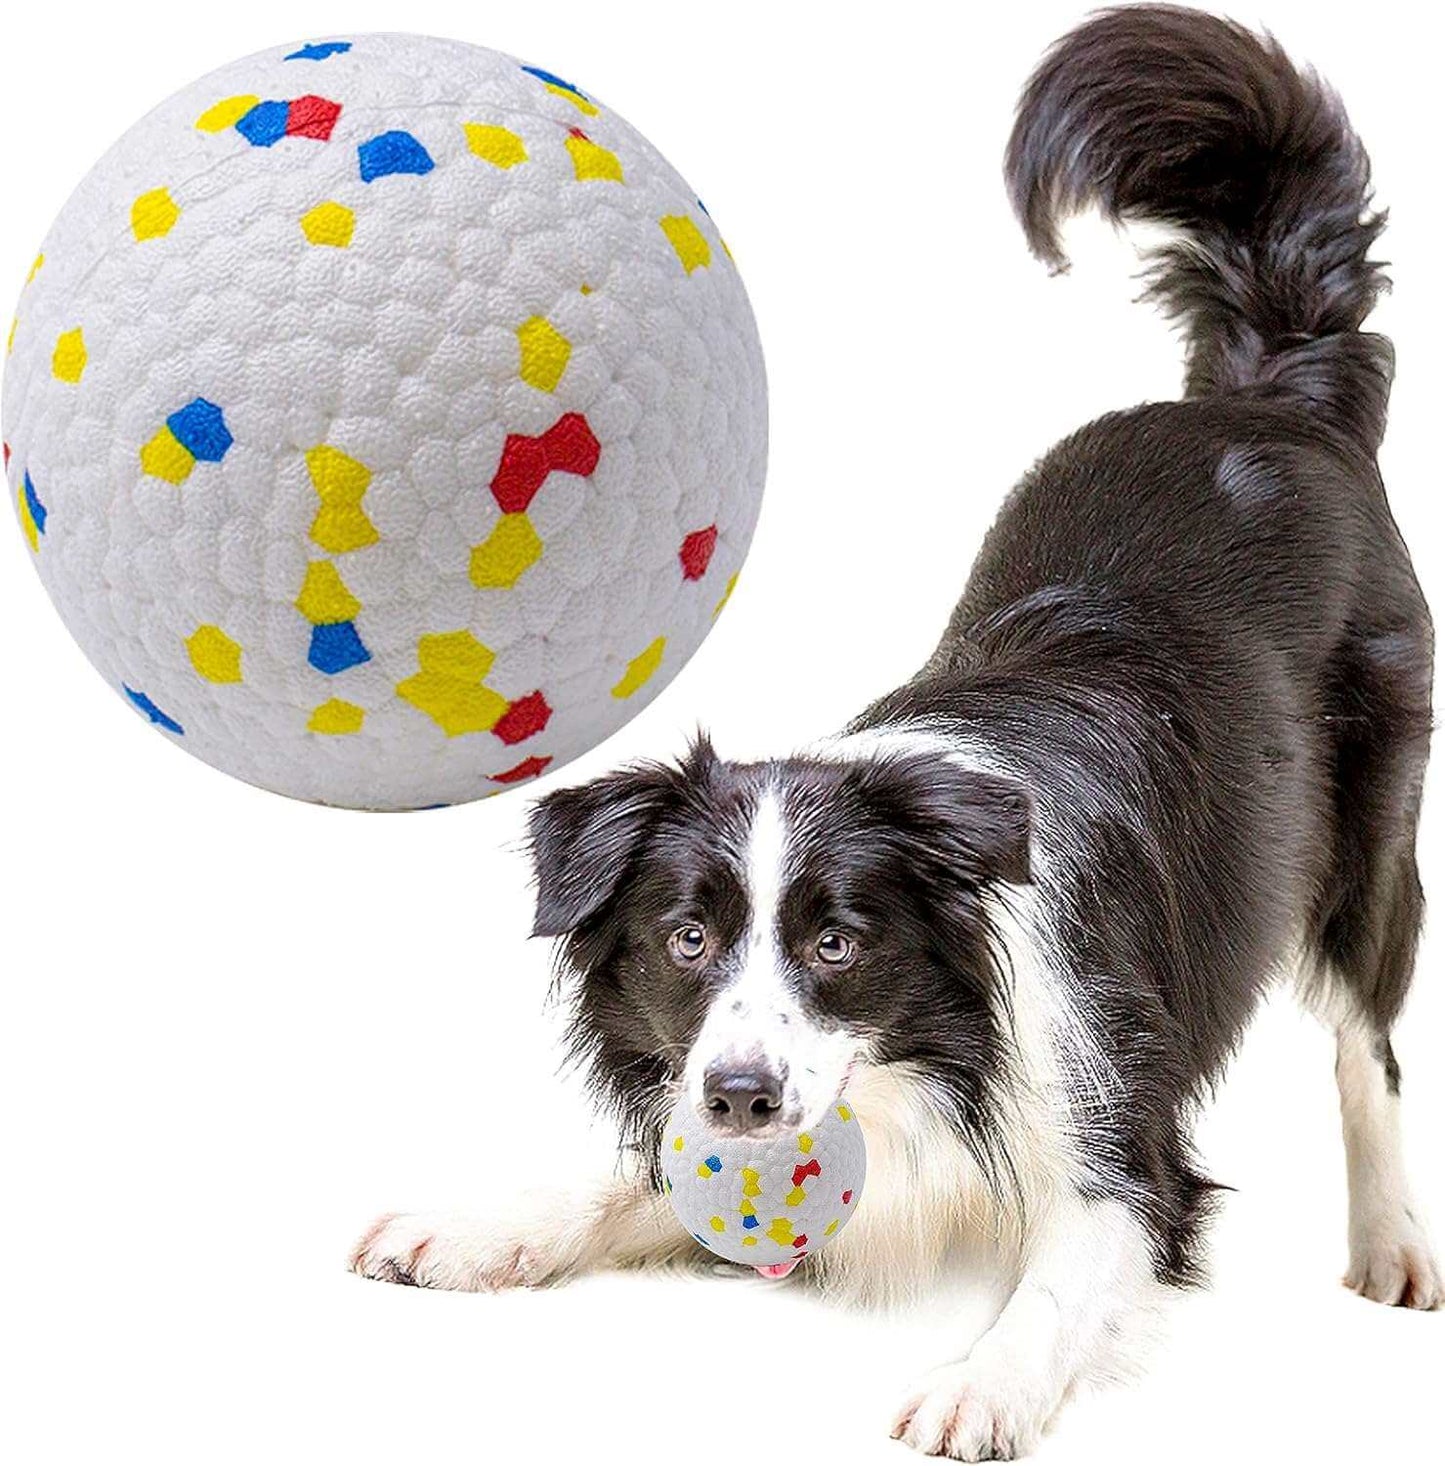 kutkutstyle Toys KUTKUT  Interactive Dog Bouncy Jolly Ball Puppy Teething Toy Durable Solid ETPU Elastic Dog Chew Toy Ball for Small Training Catch and Fetch, Light Weight & Floats in Water (1Pc)